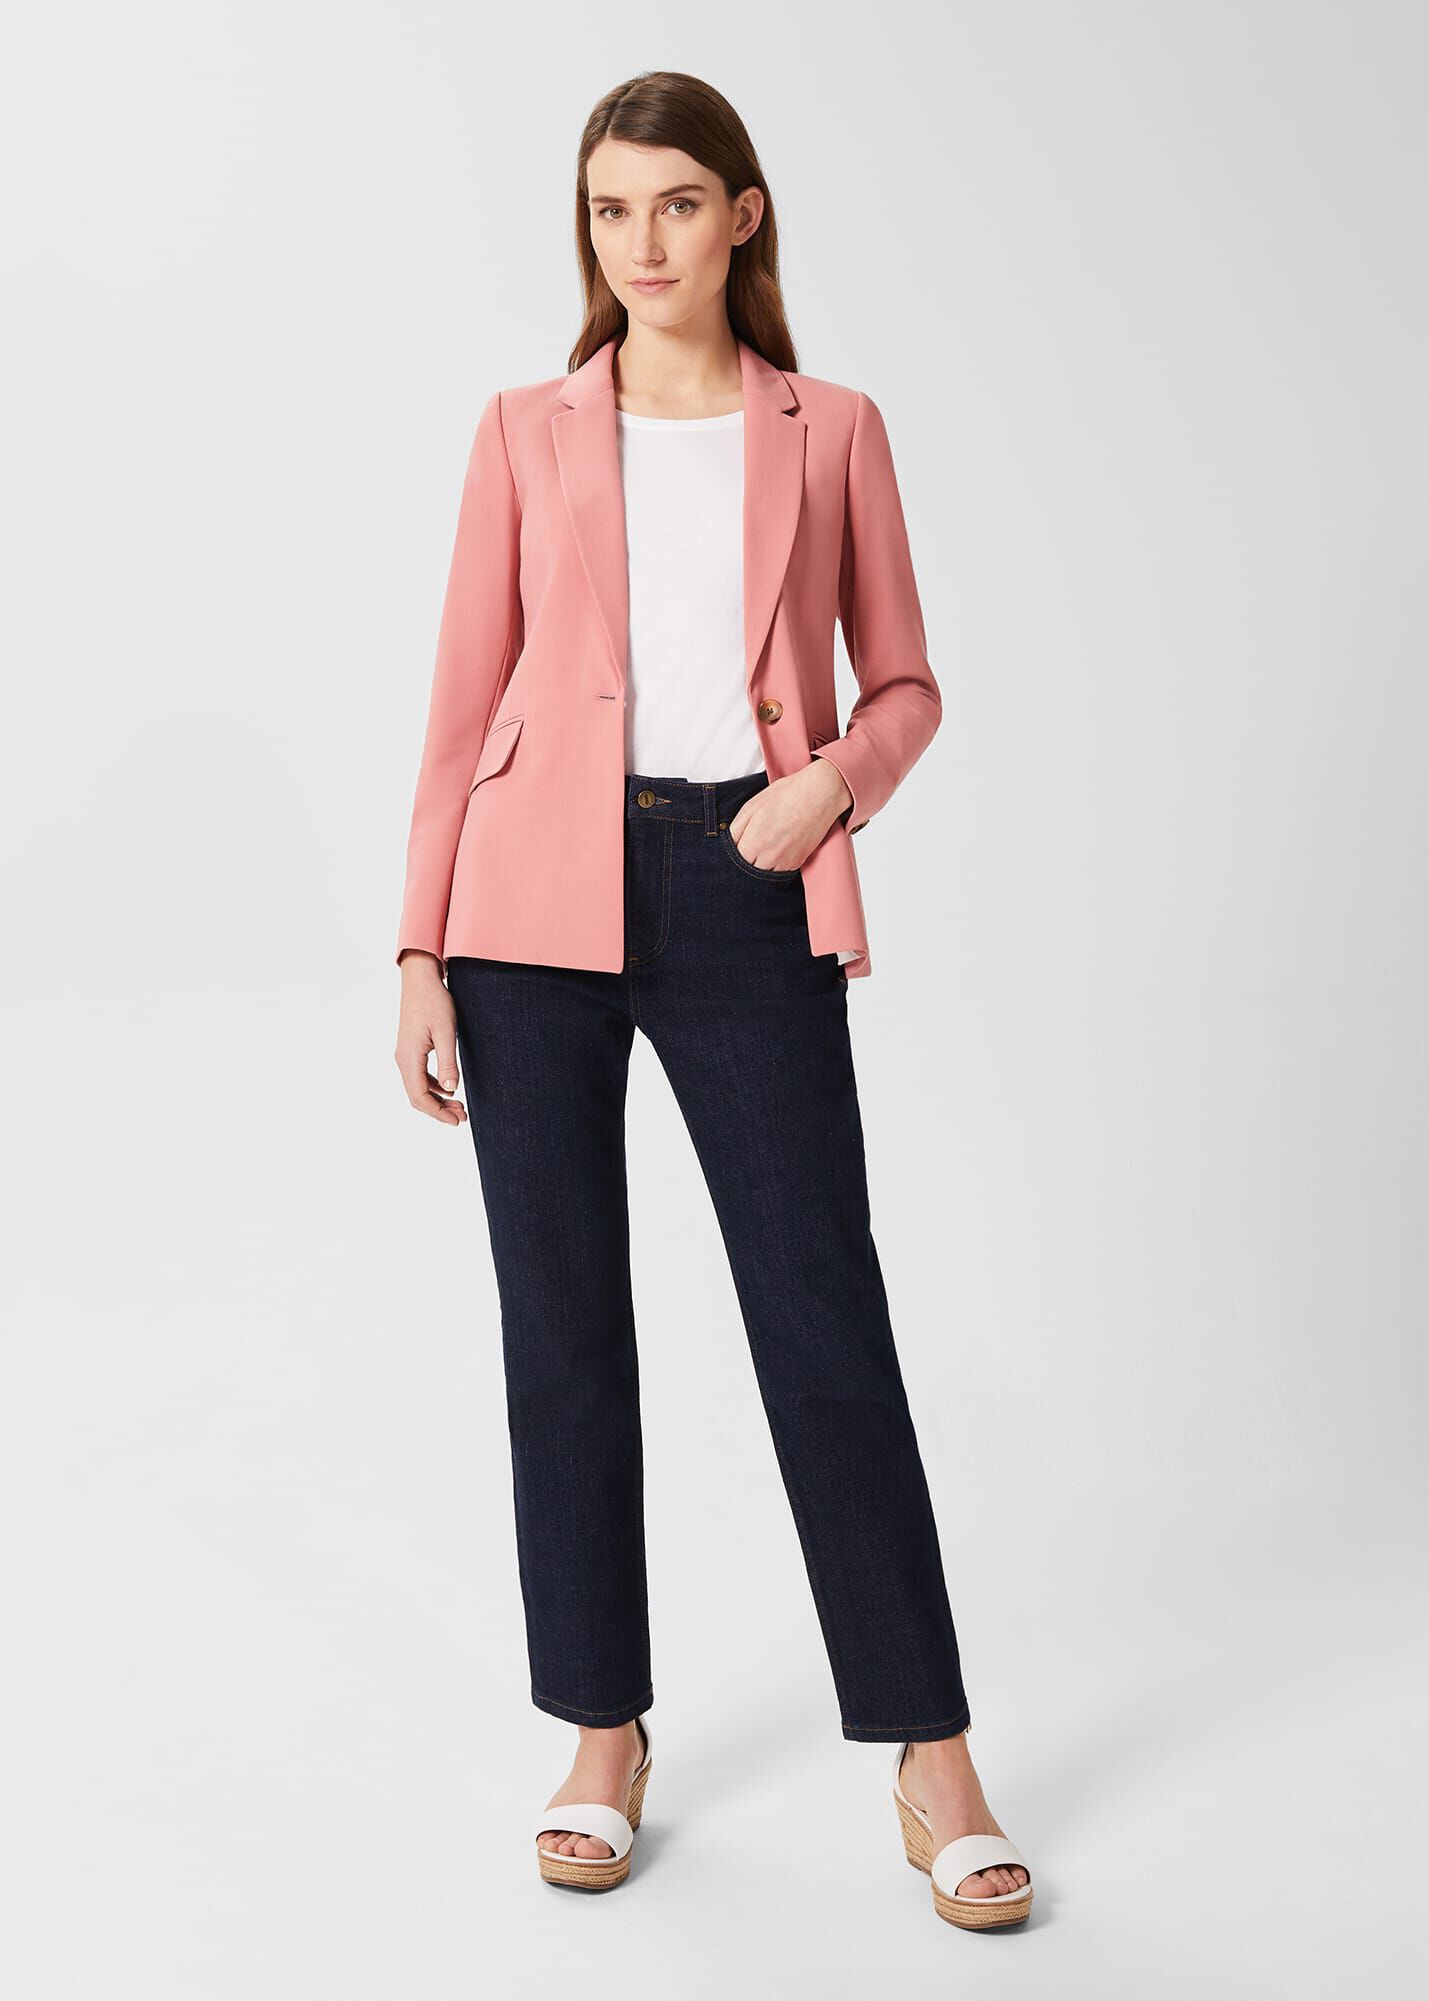 Womens Suits & Blazers Formal Elegant Trouser Office Ladies Pink Gray  Stripe Plaid Pants For Women Sets From Waxeer, $152.27 | DHgate.Com